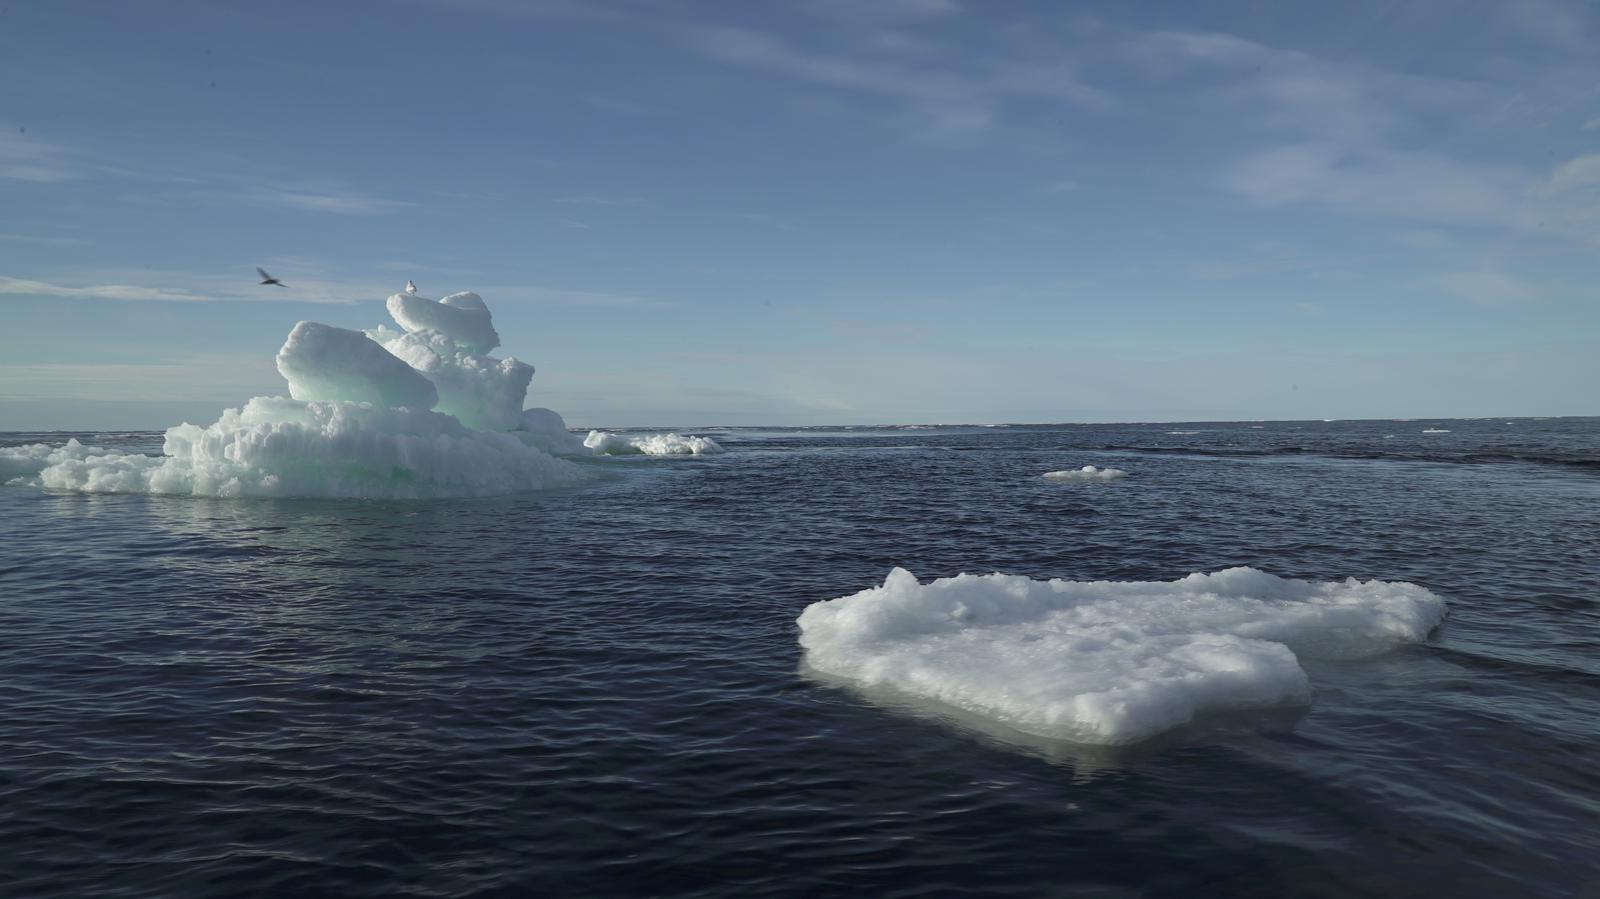 Earth is losing ice faster today than in the mid-1990s, study suggests